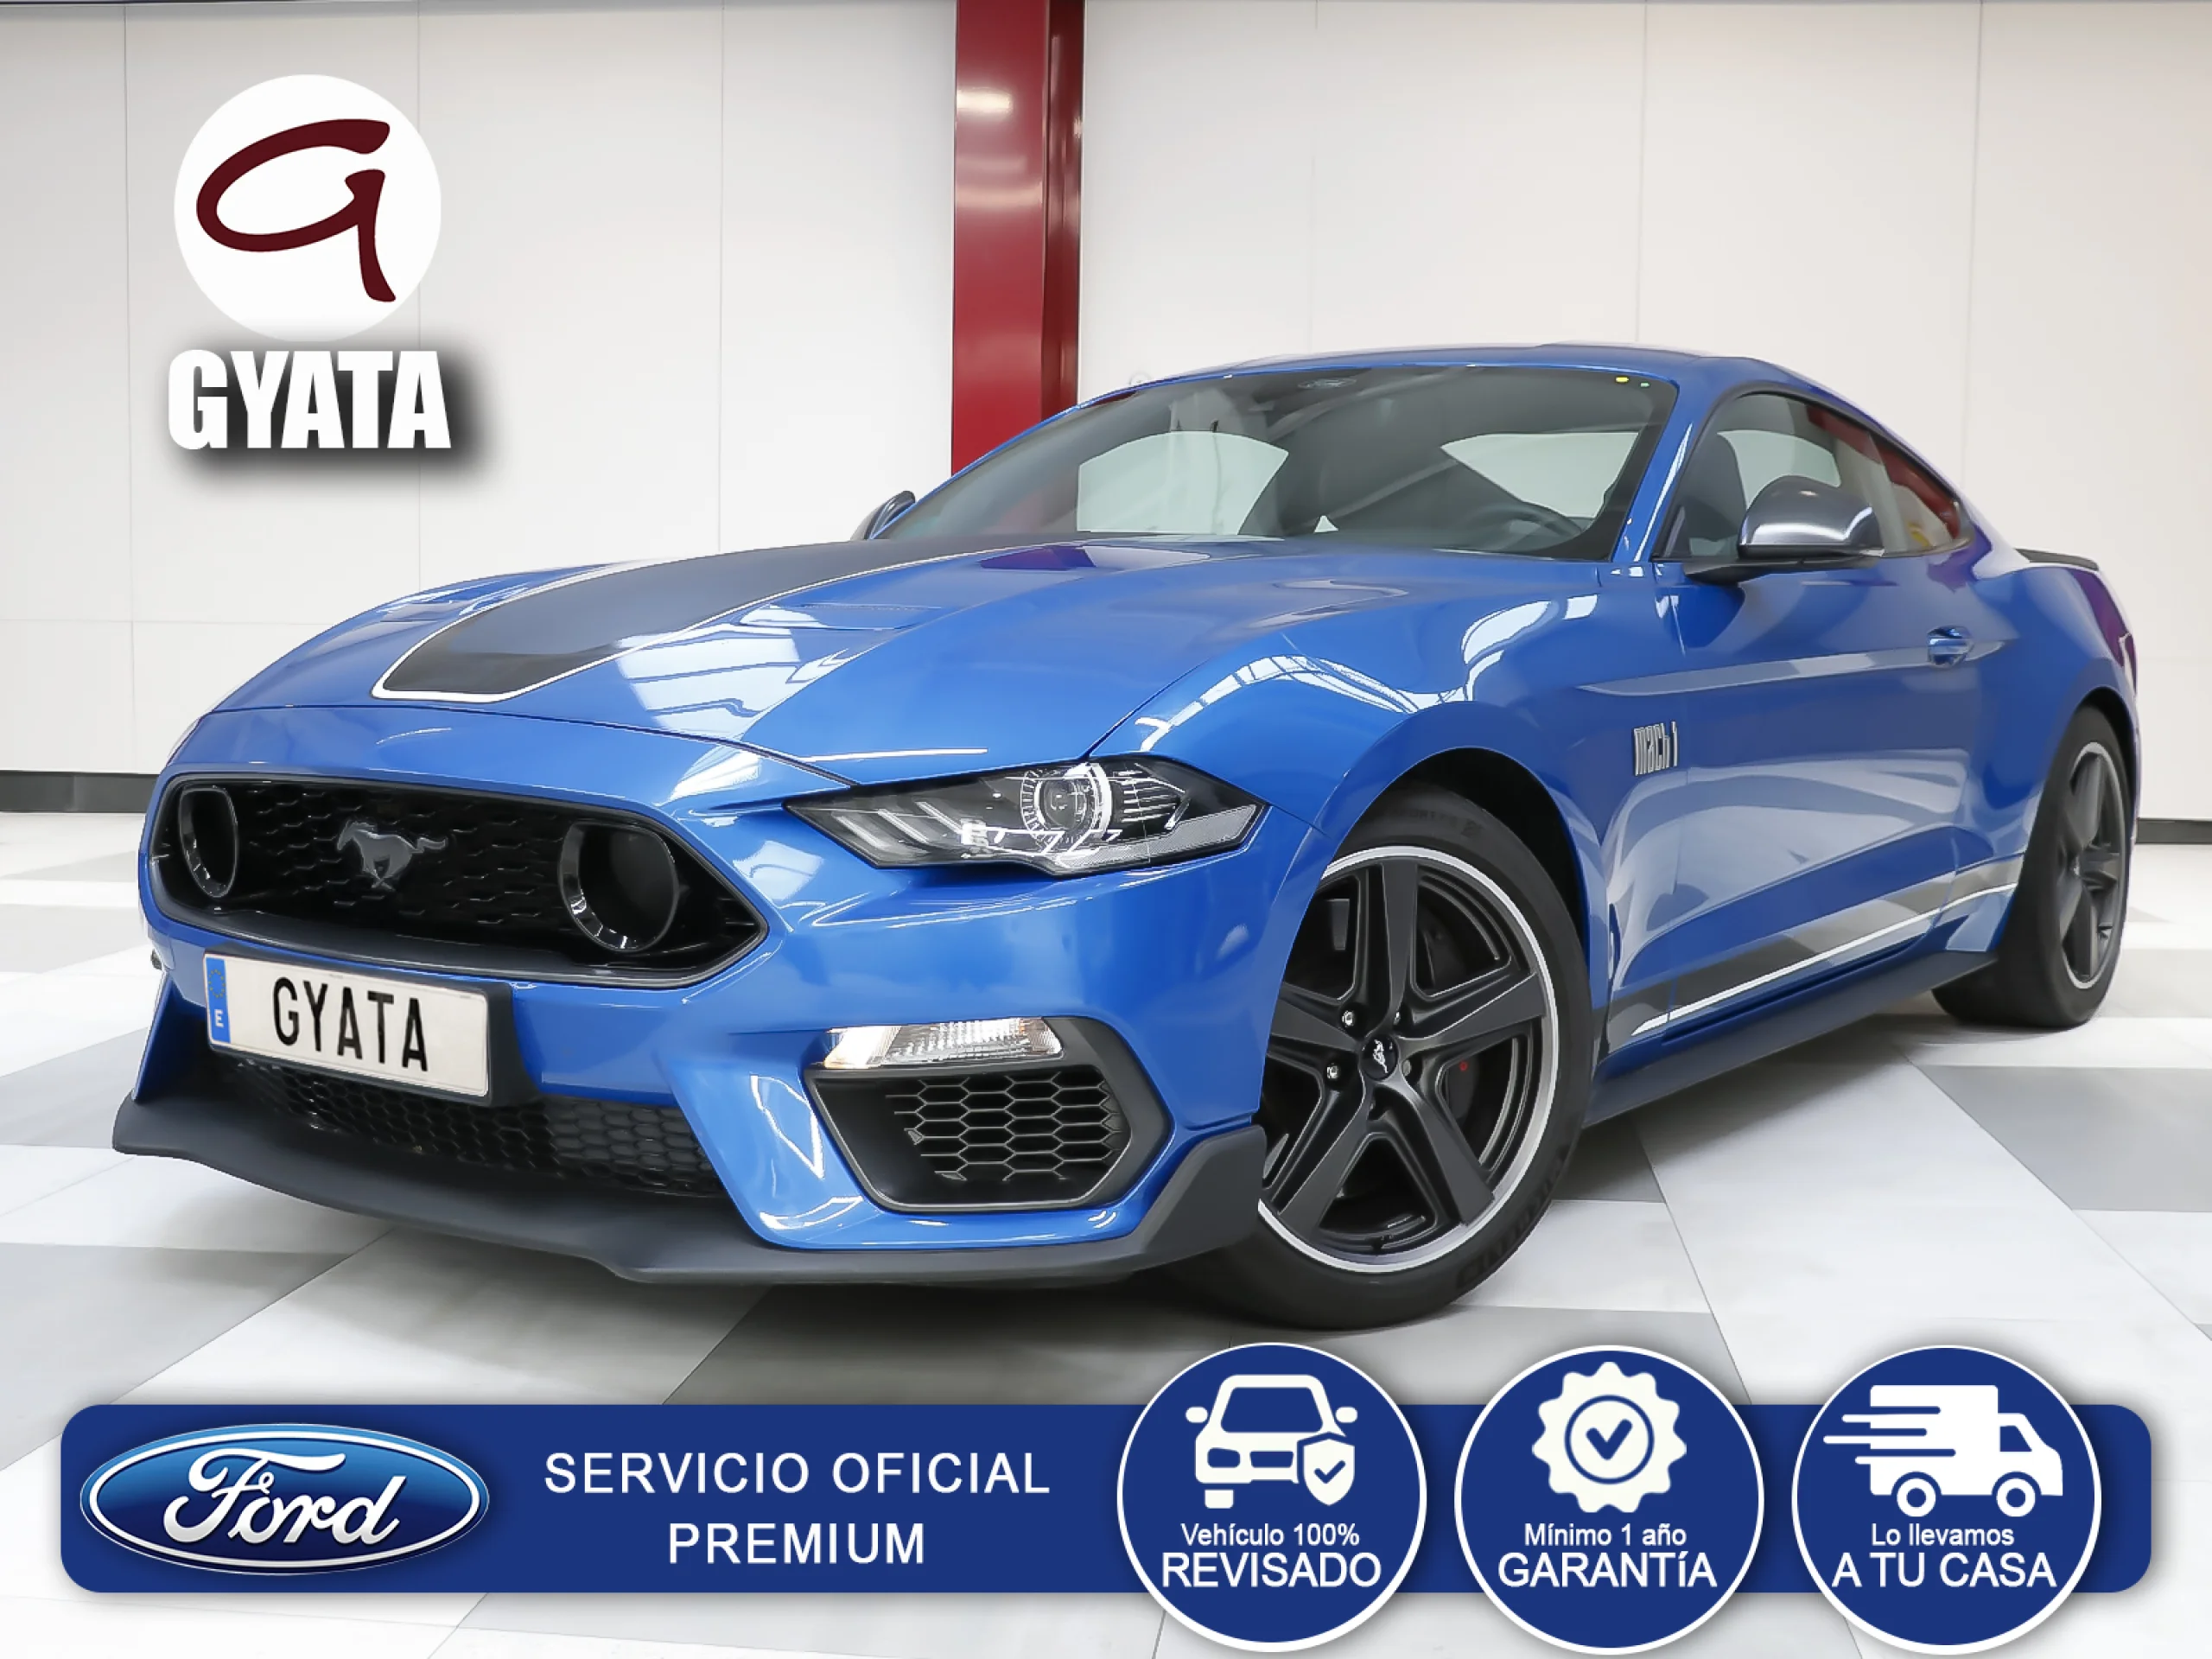 Ford Mustang 5.0 Ti-VCT Coupe Fastback 338 kW (459 CV) - Foto 1